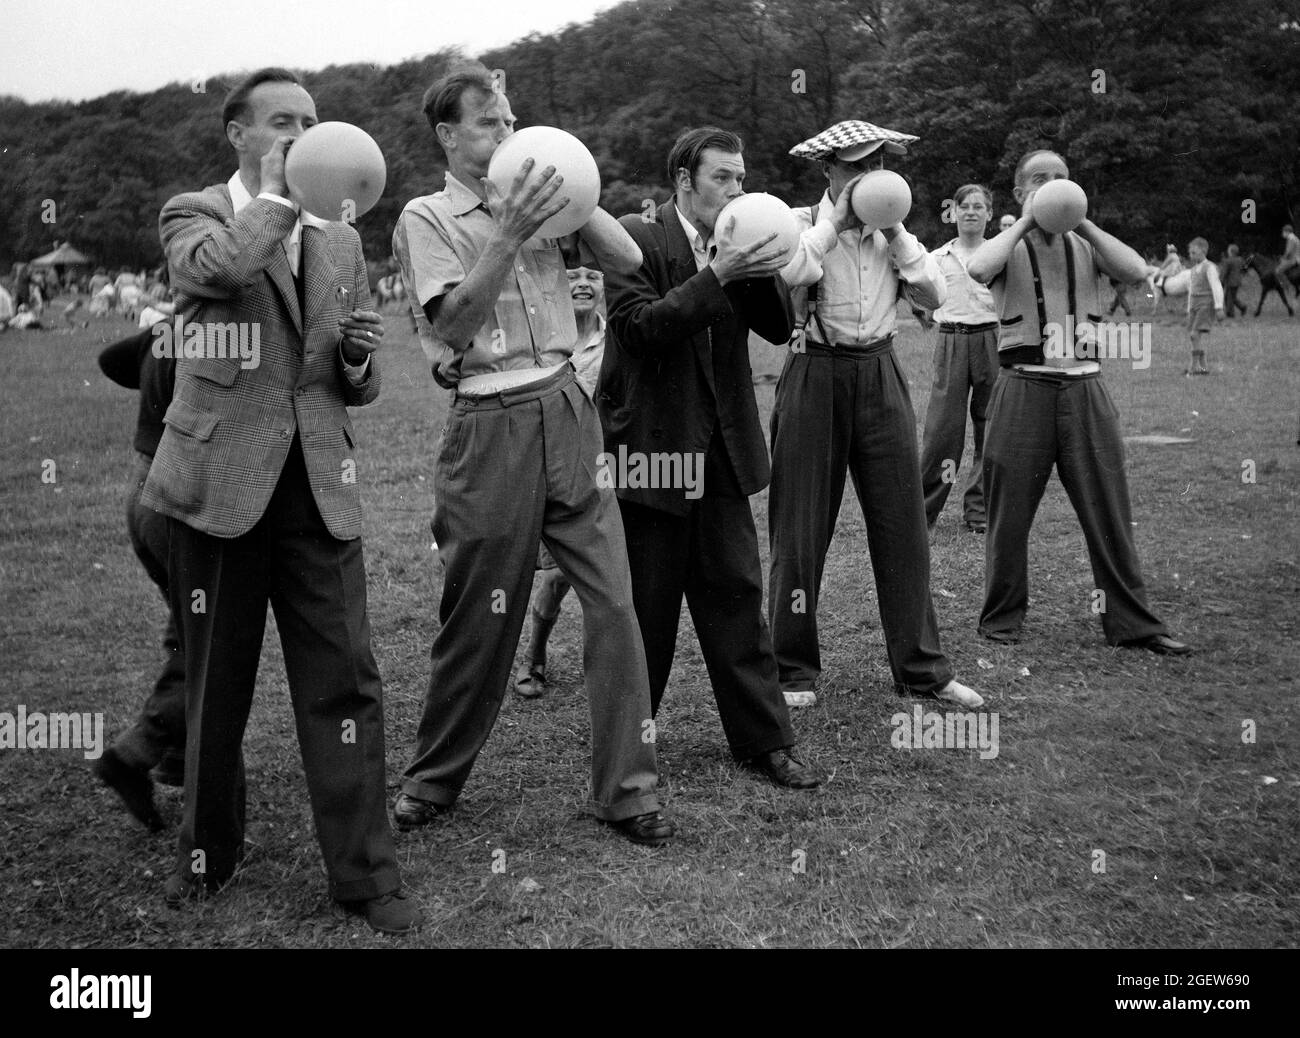 1950s holiday camp britain Black and White Stock Photos & Images - Alamy